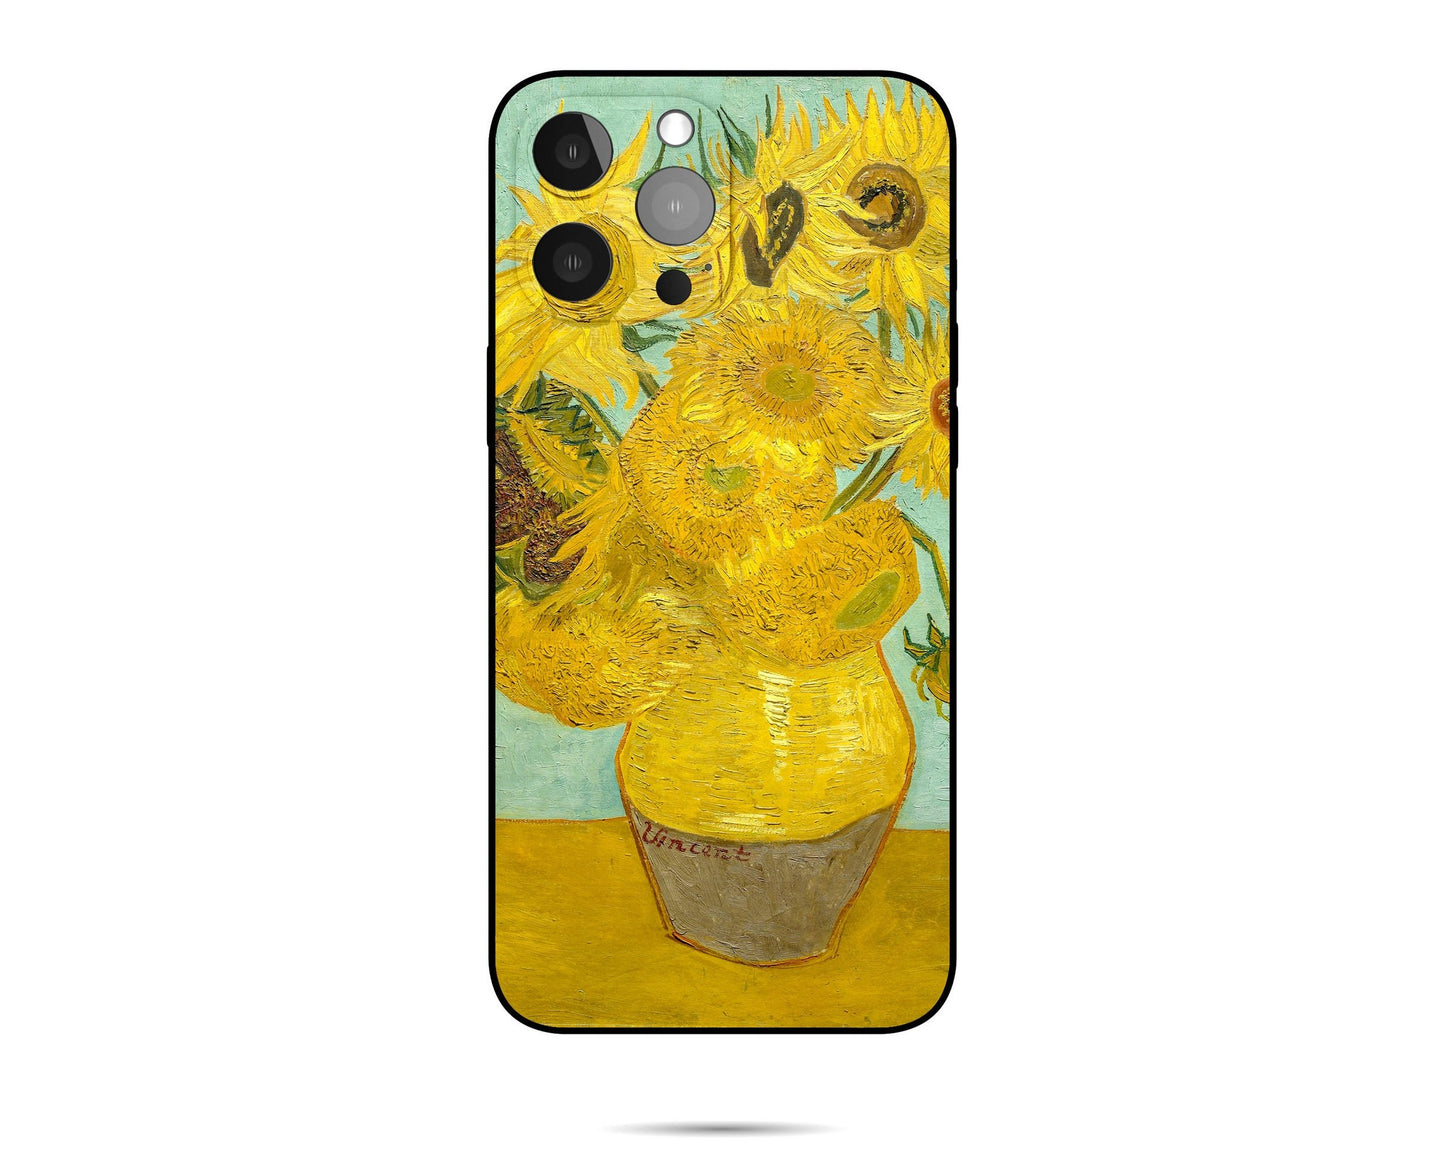 Vincent Van Gogh Iphone 14 Case, Iphone 11, Iphone Xr Case, Iphone 8 Plus Case Art, Designer Iphone Case, Gift For Her, Iphone Case Silicone